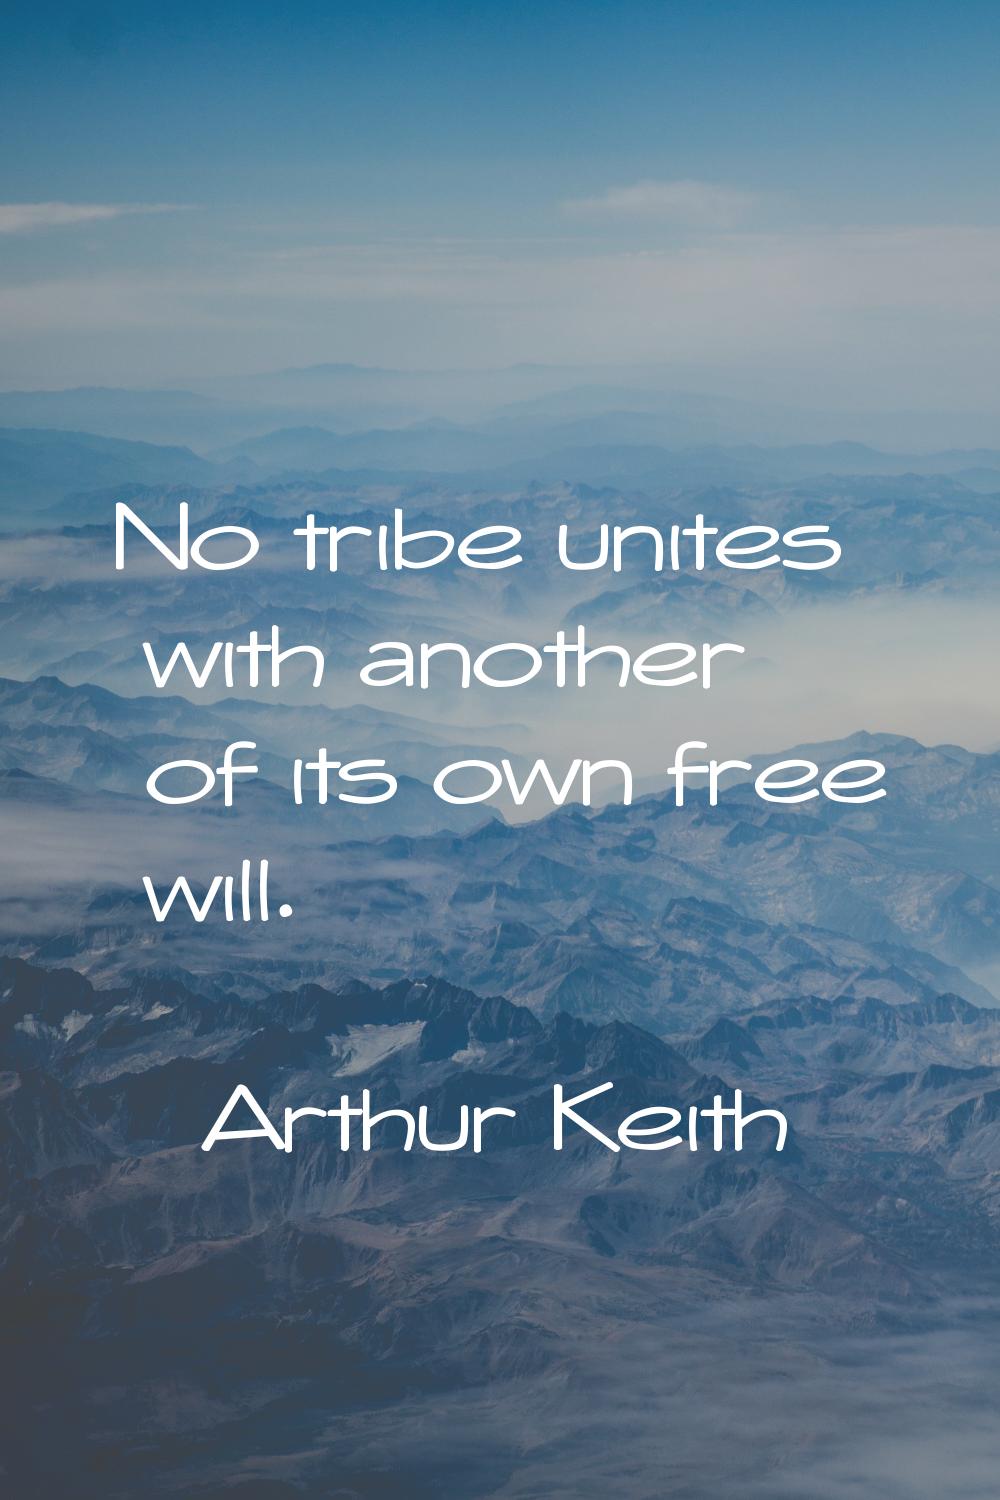 No tribe unites with another of its own free will.